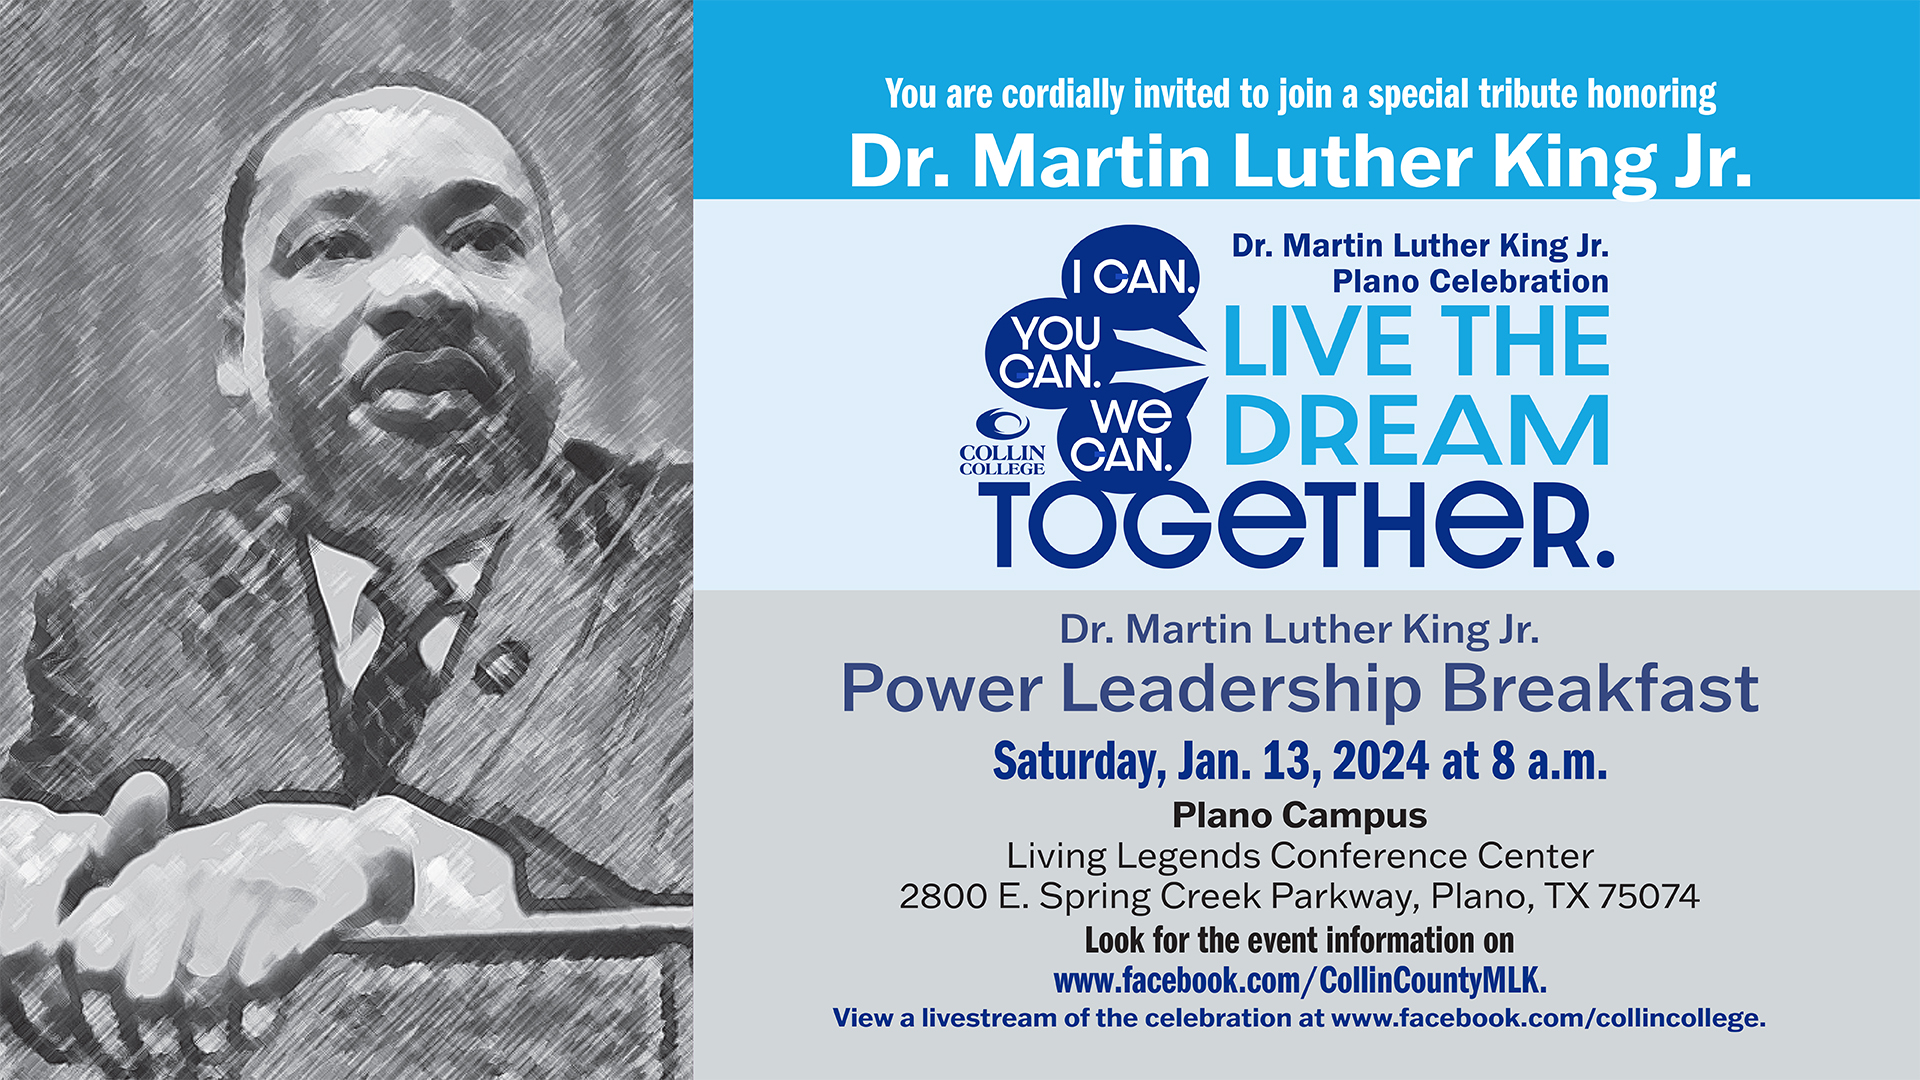 Invitation slide for the Dr. Martin Luther King Jr. Power Leadership Breakfast on Jan. 13 at 8 a.m. in the Collin College Plano Campus Living Legends Conference Center